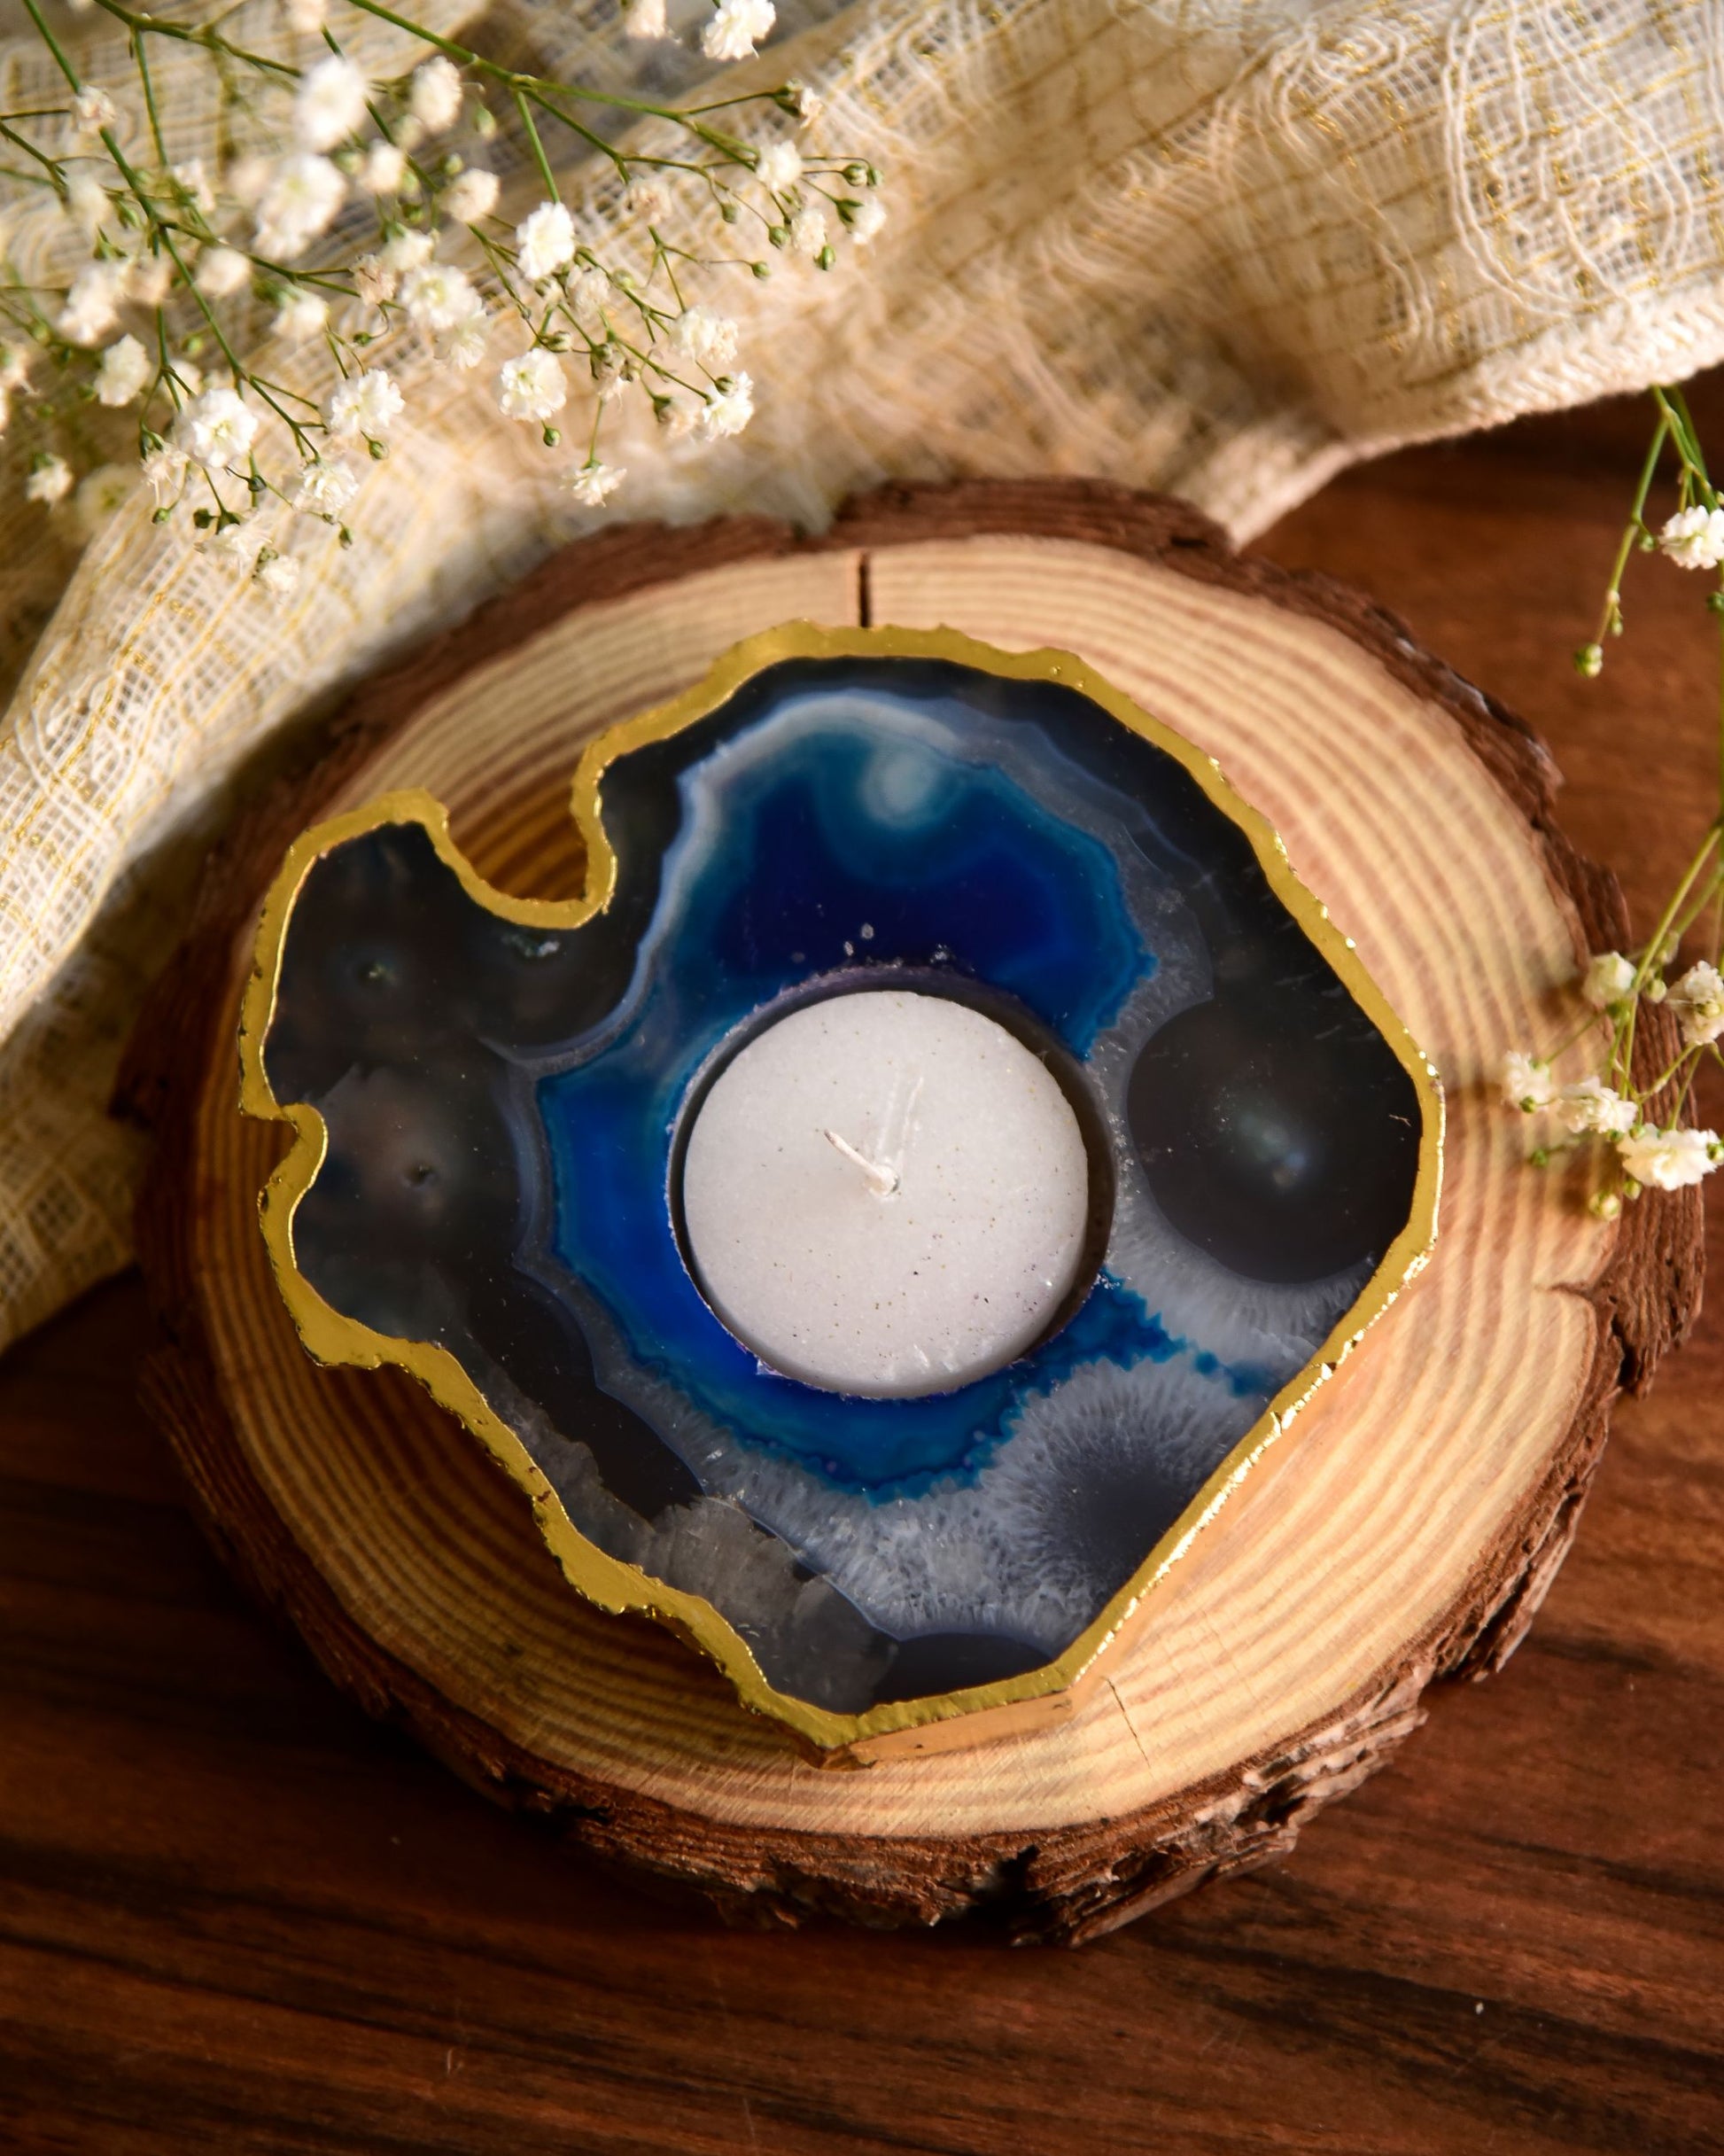 Agate candle holder Gemstone tealight holder Natural agate decor Crystal candle holder Tealight candle holder Positive vibes decor Agate home accent Decorative agate candle Natural beauty decor Home ambiance enhancer Unique home decor Agate gift idea Office decor accent Warm and inviting atmosphere. TESU